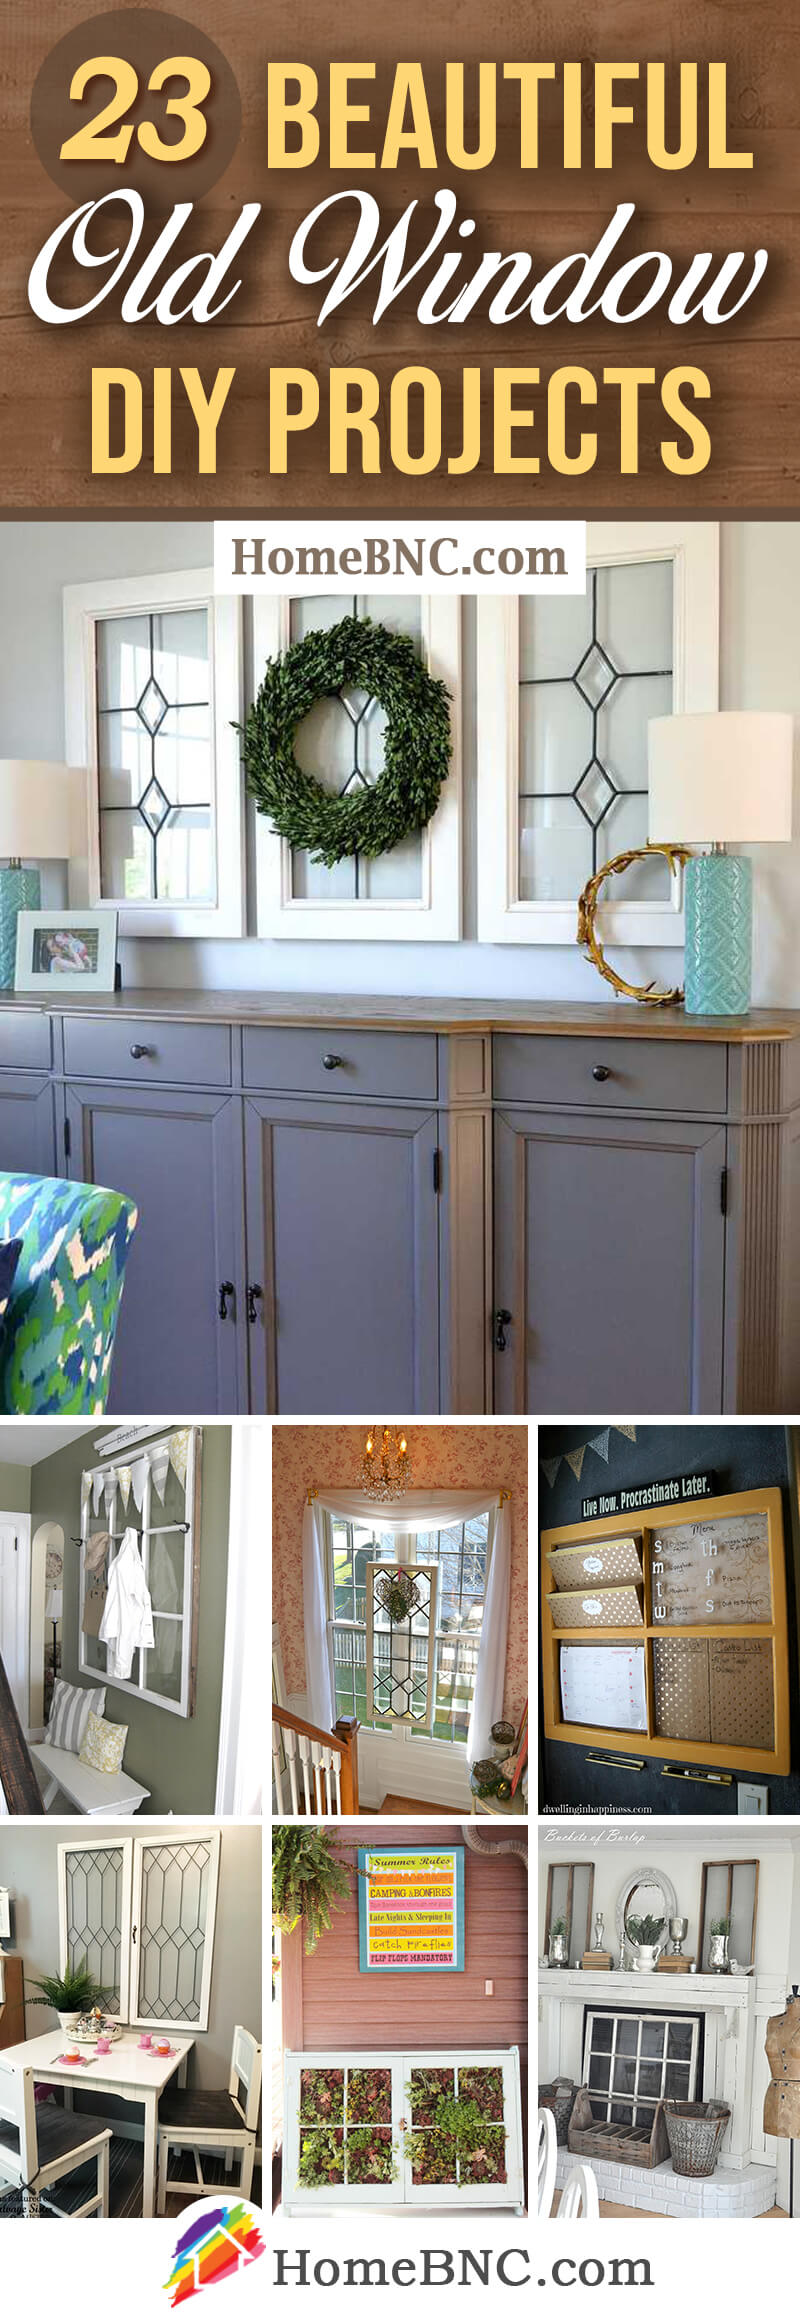 23 Best Old Window DIY Projects that Invites Warmth in 2021